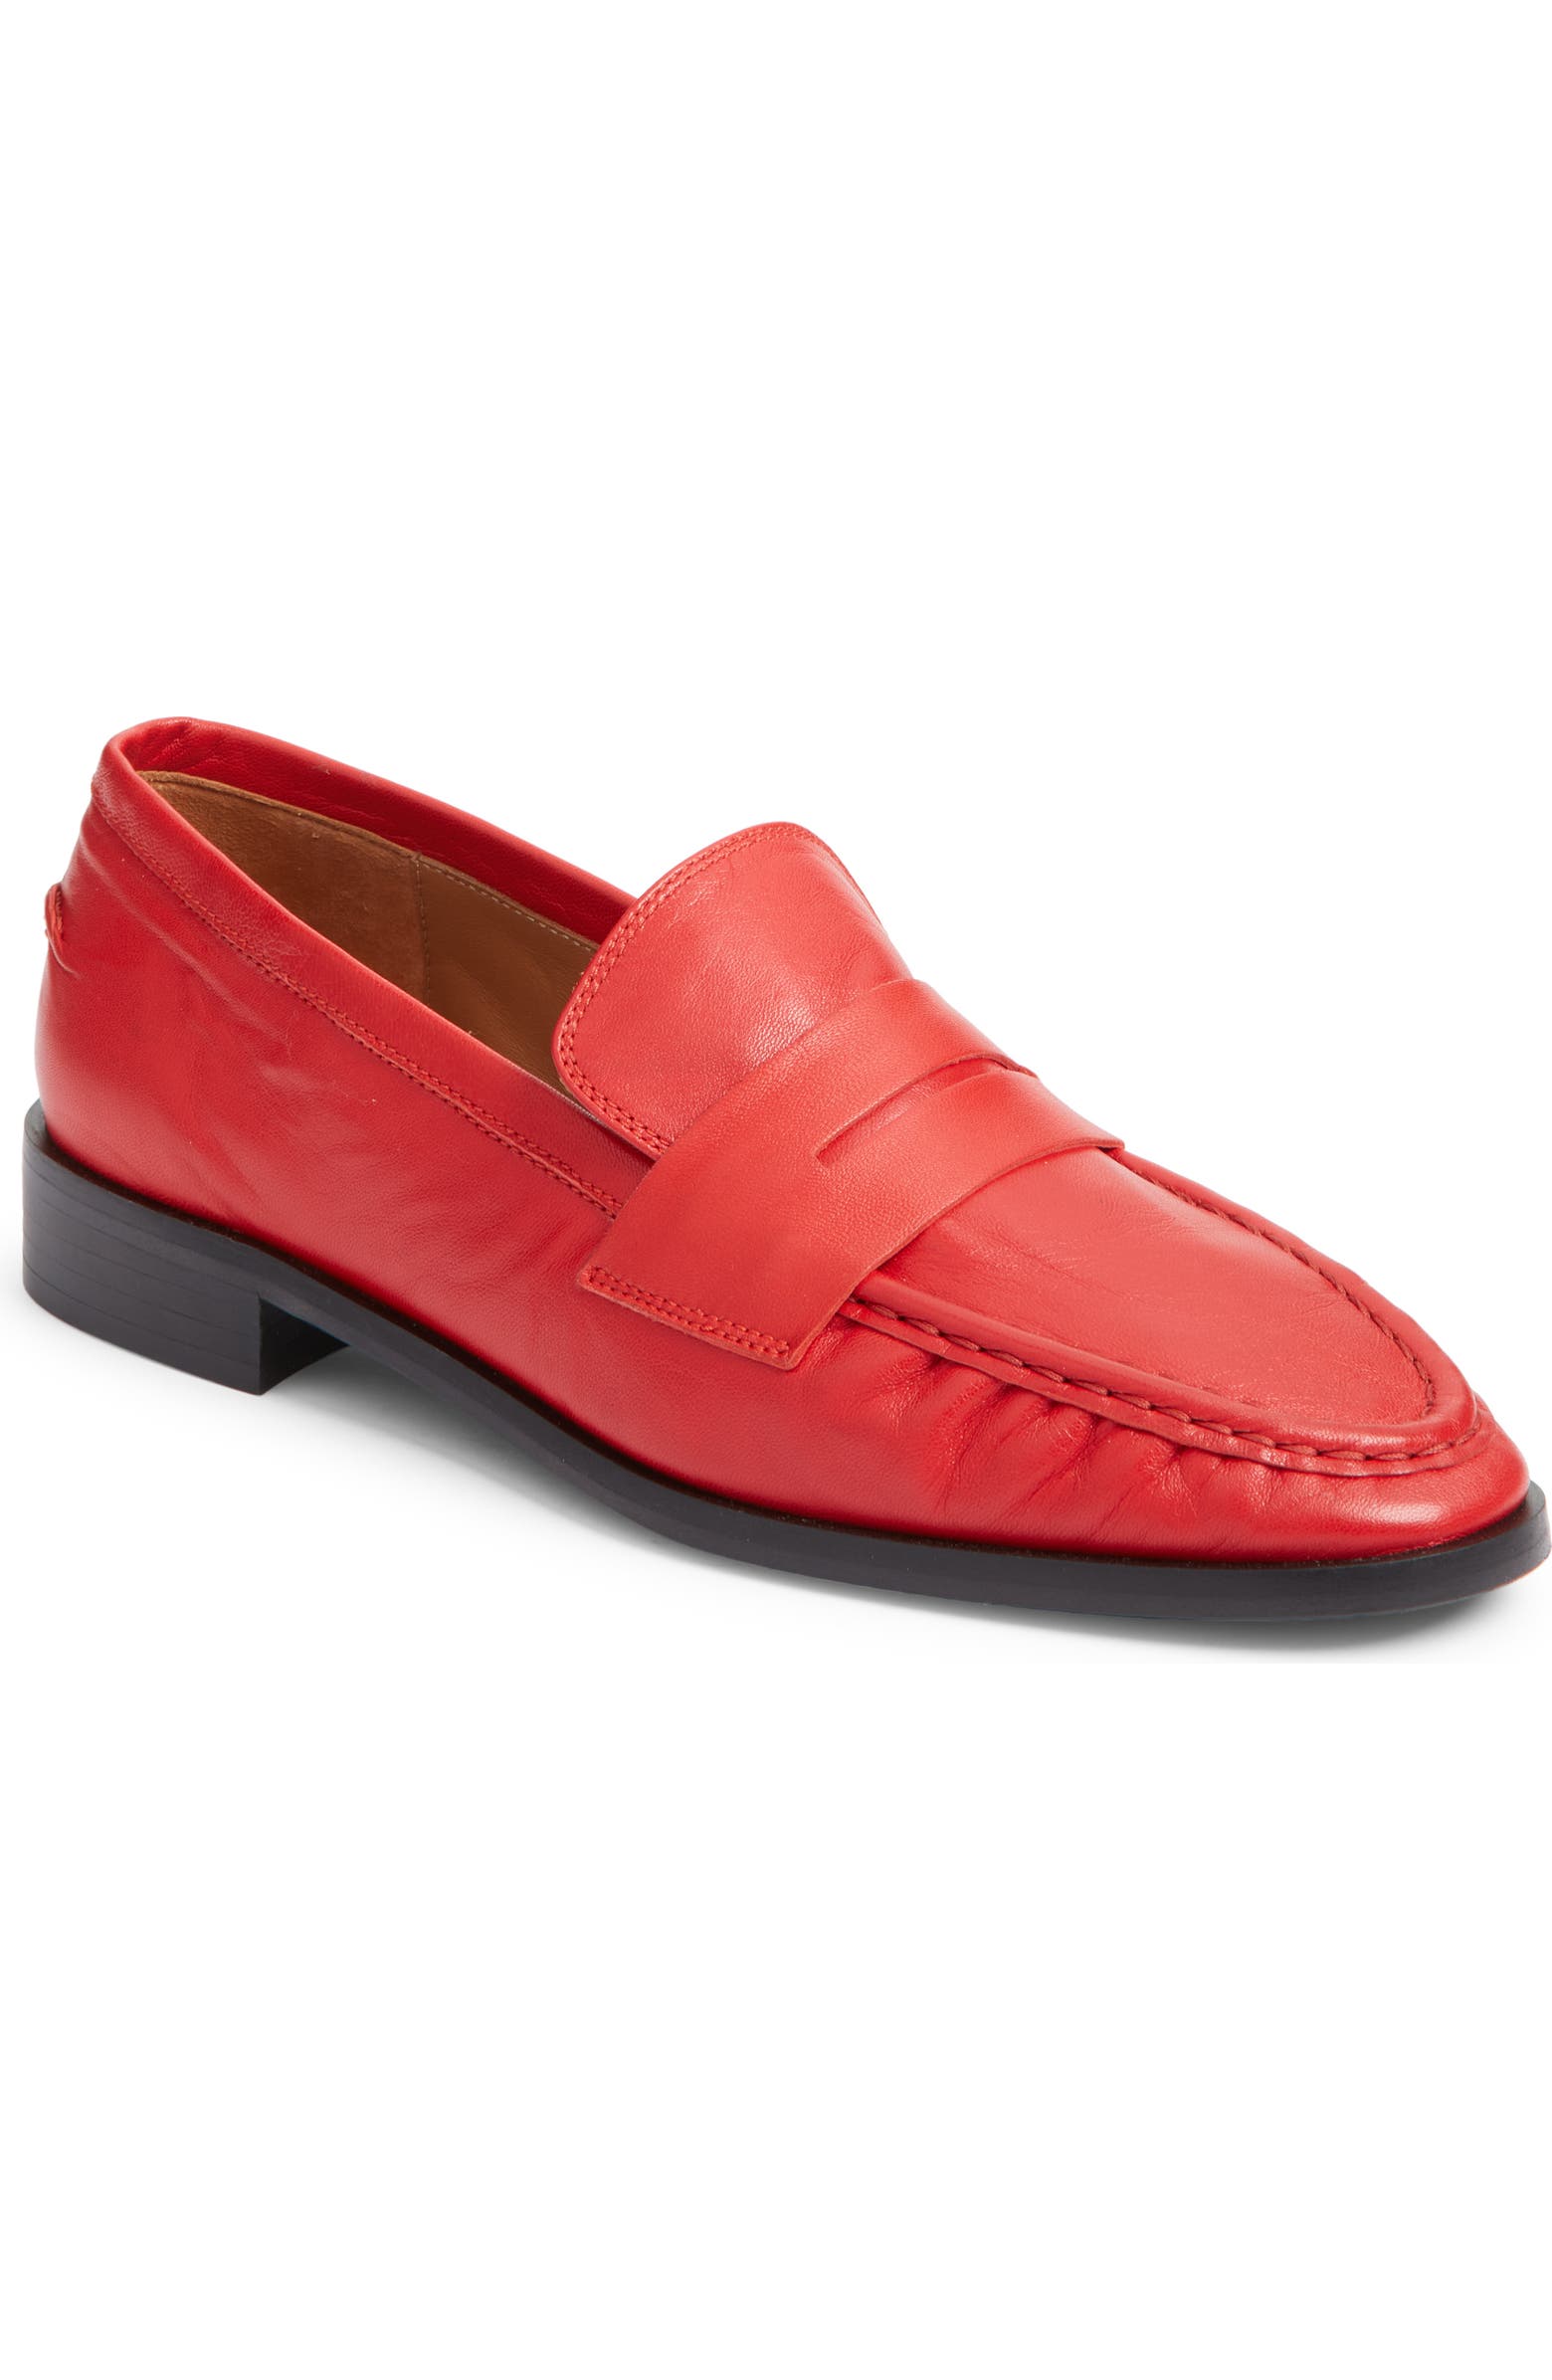 Airola Penny Loafer